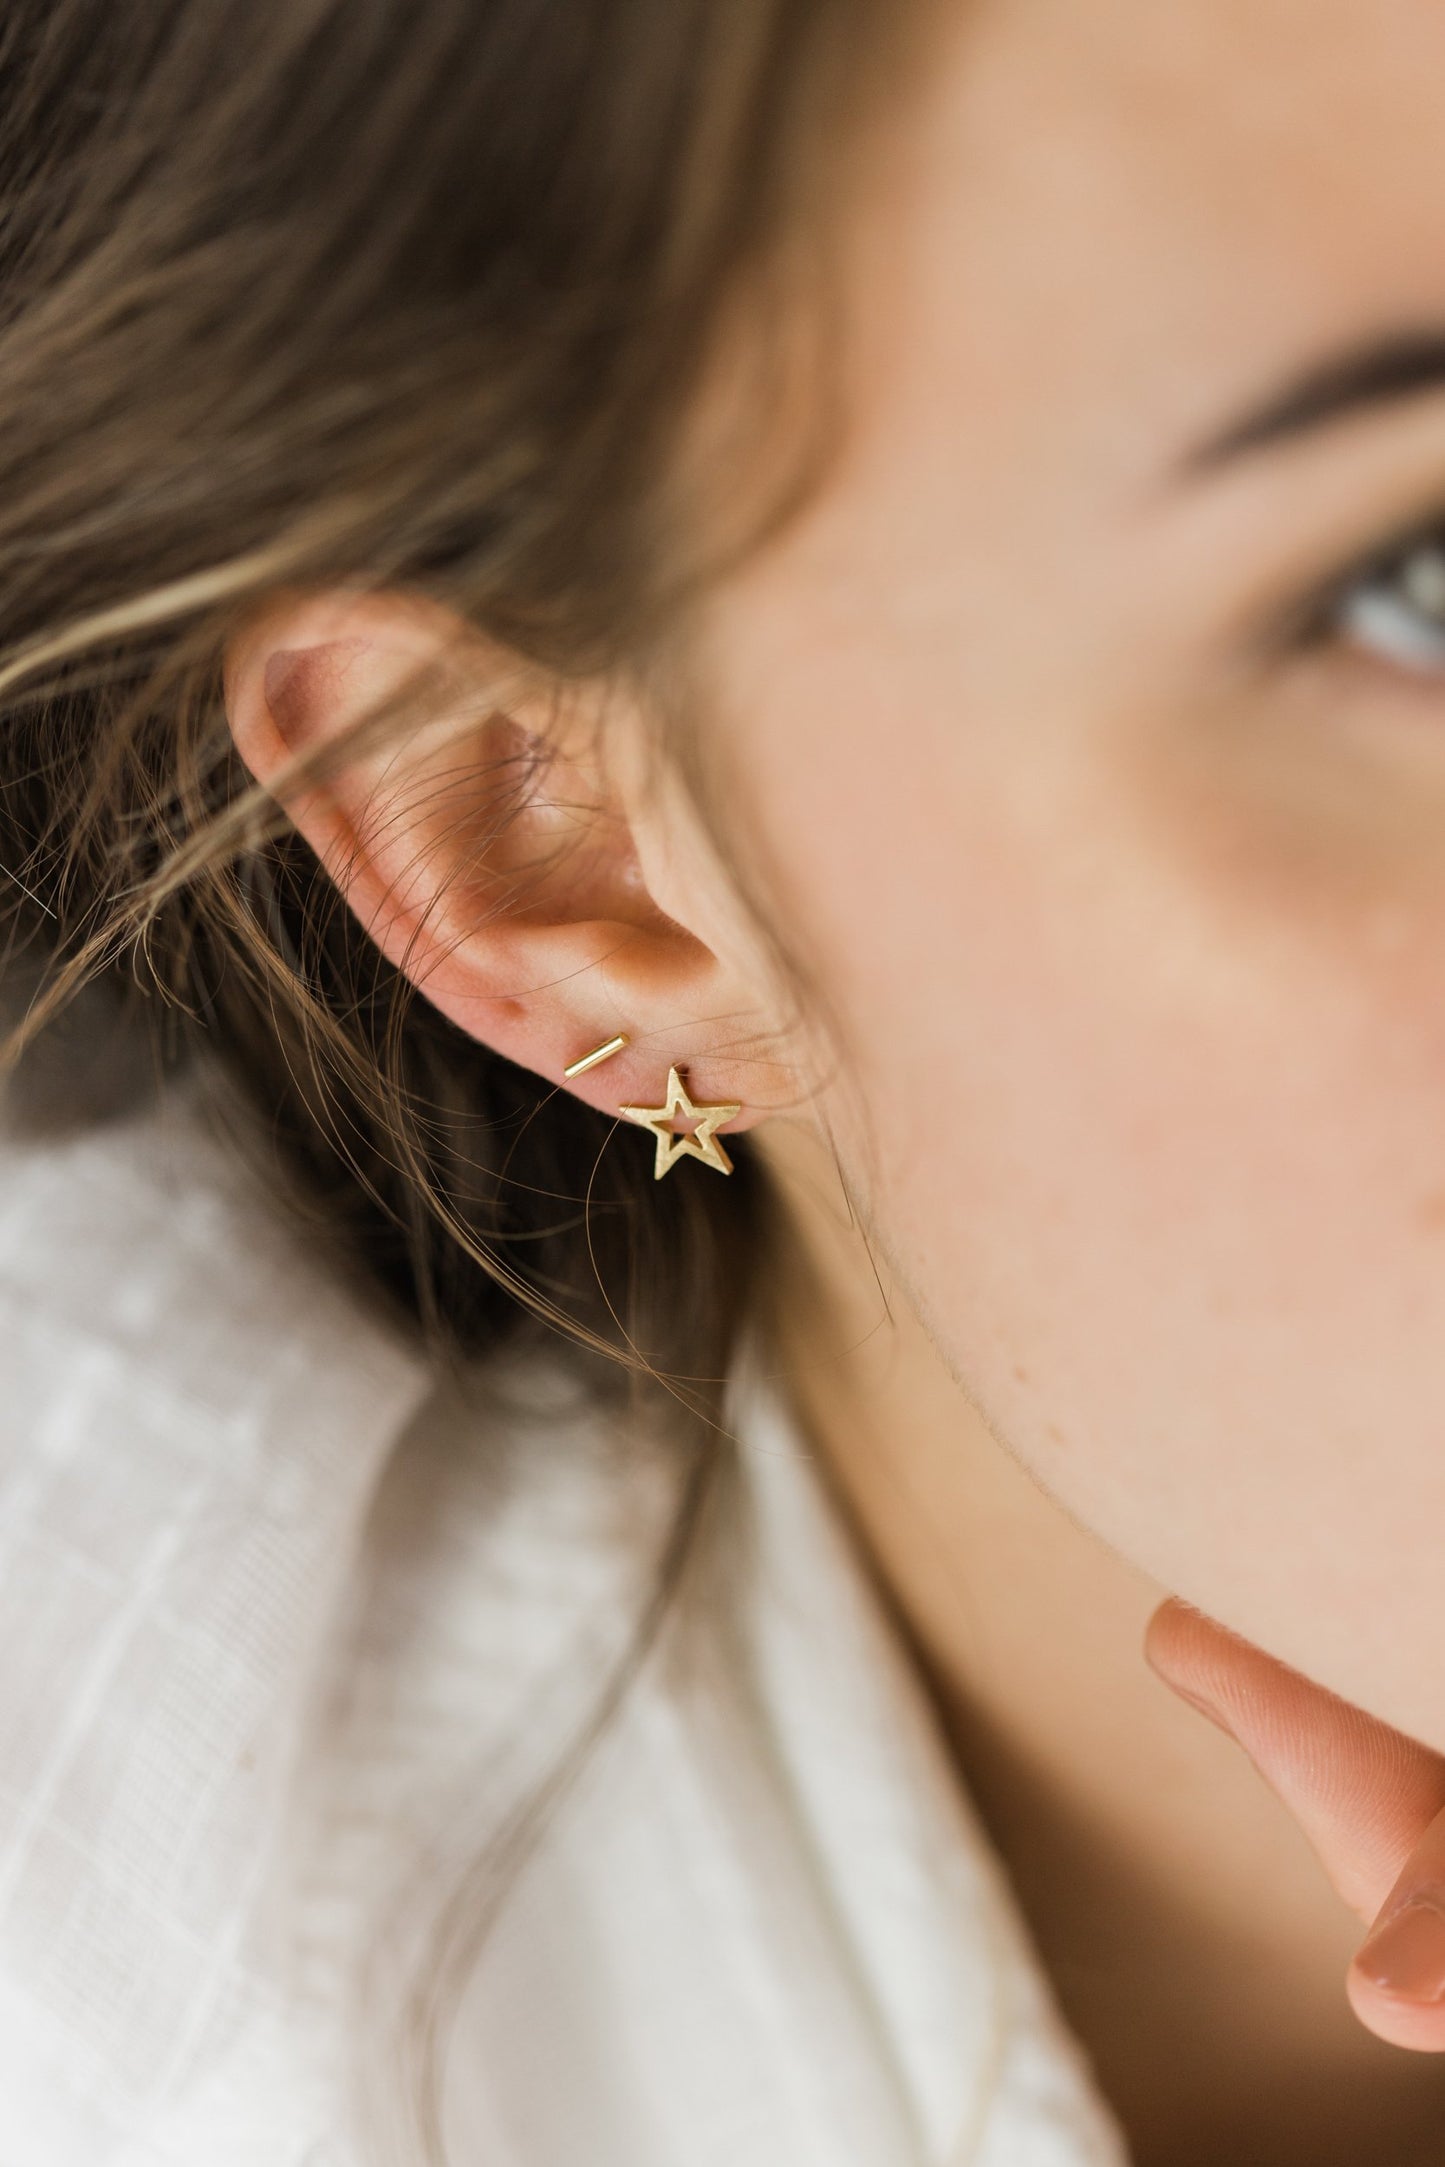 Close up of Small Star Stud earring